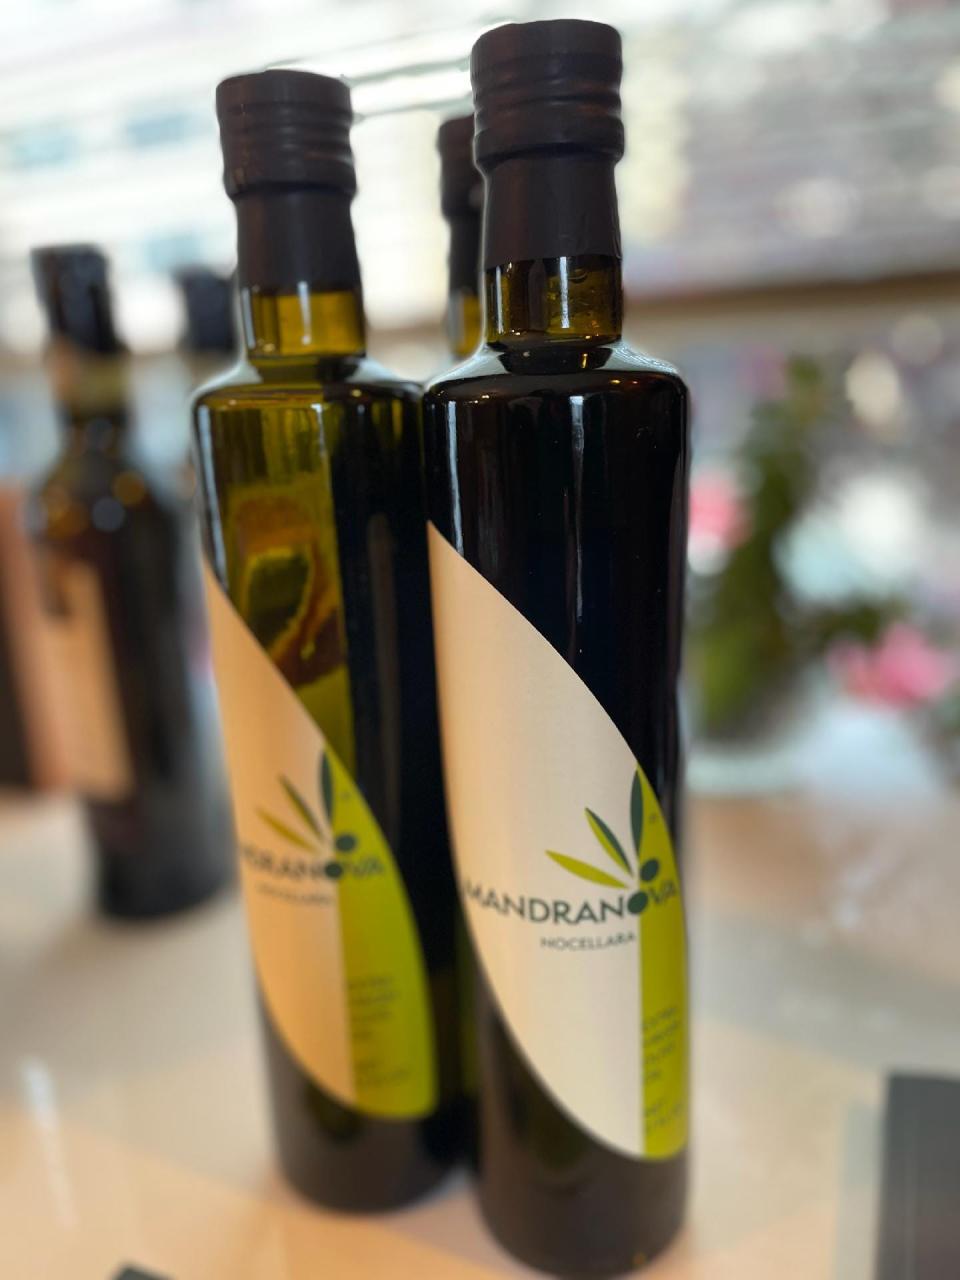 Mandranova olive oils are carried at Semolina MKE. Owner Petra Orlowski recently returned from Italy, where she visited the olive oil producer.